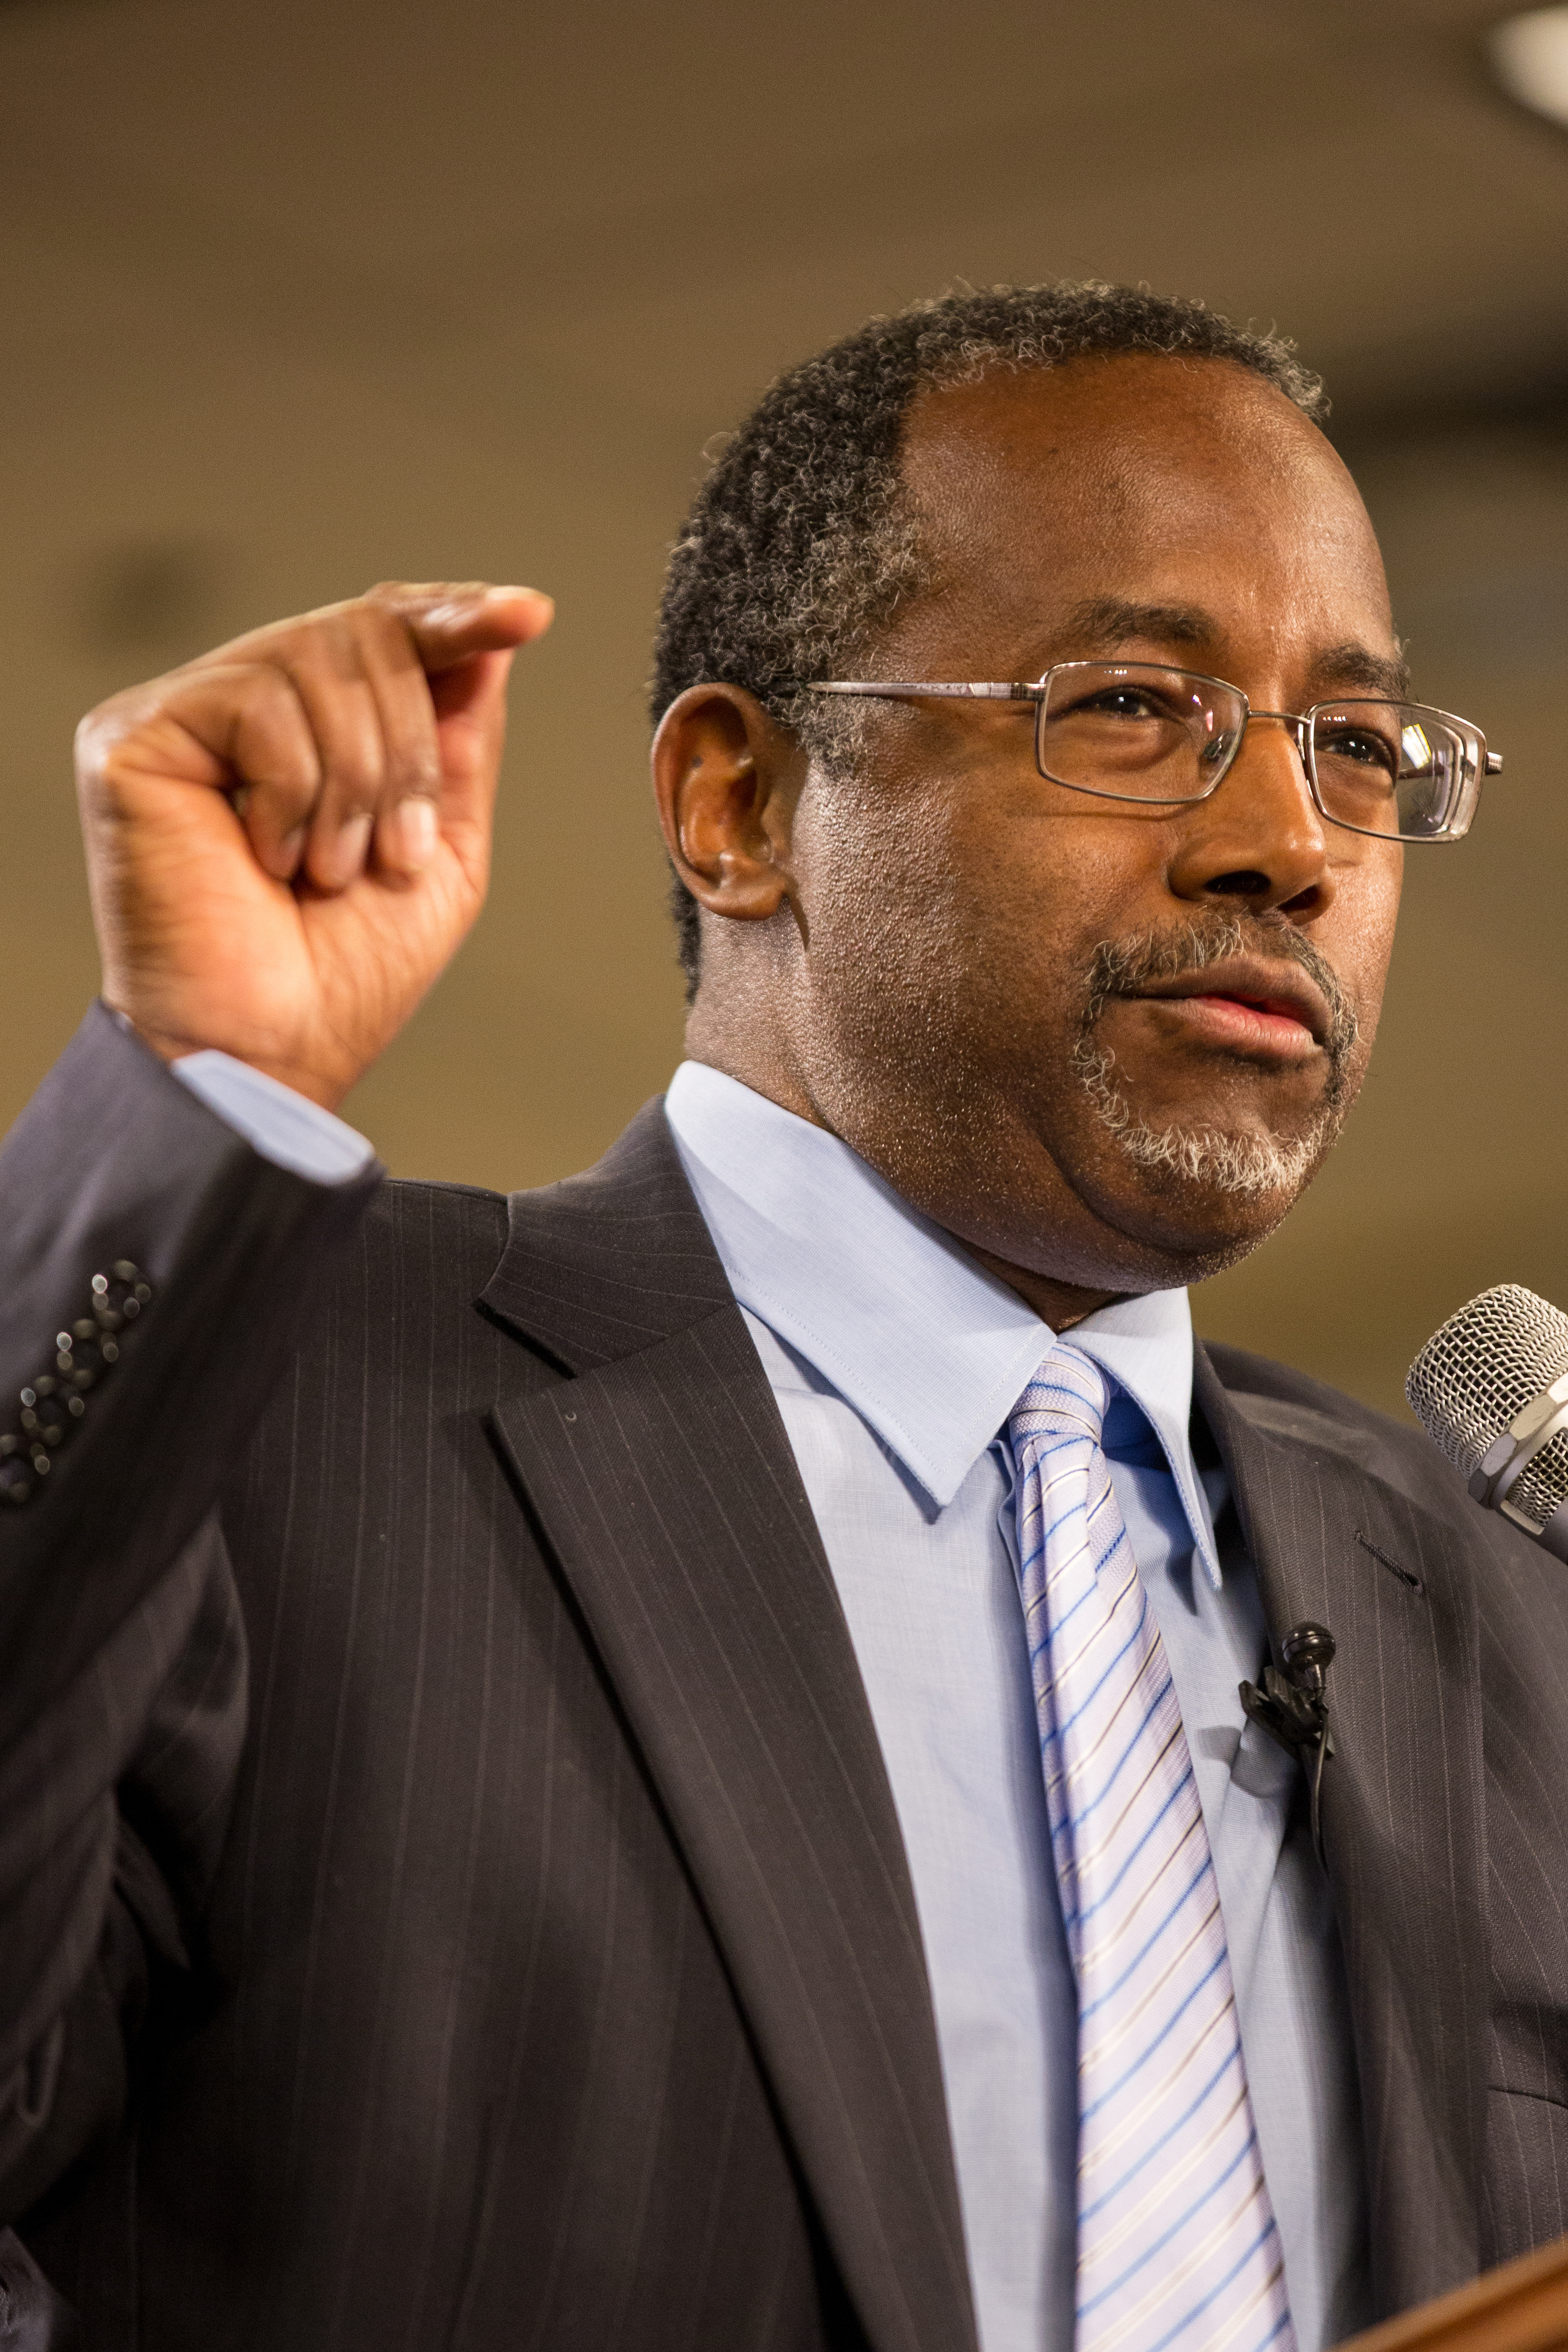 Pointing the wrong way: Carson is just plain wrong on the science